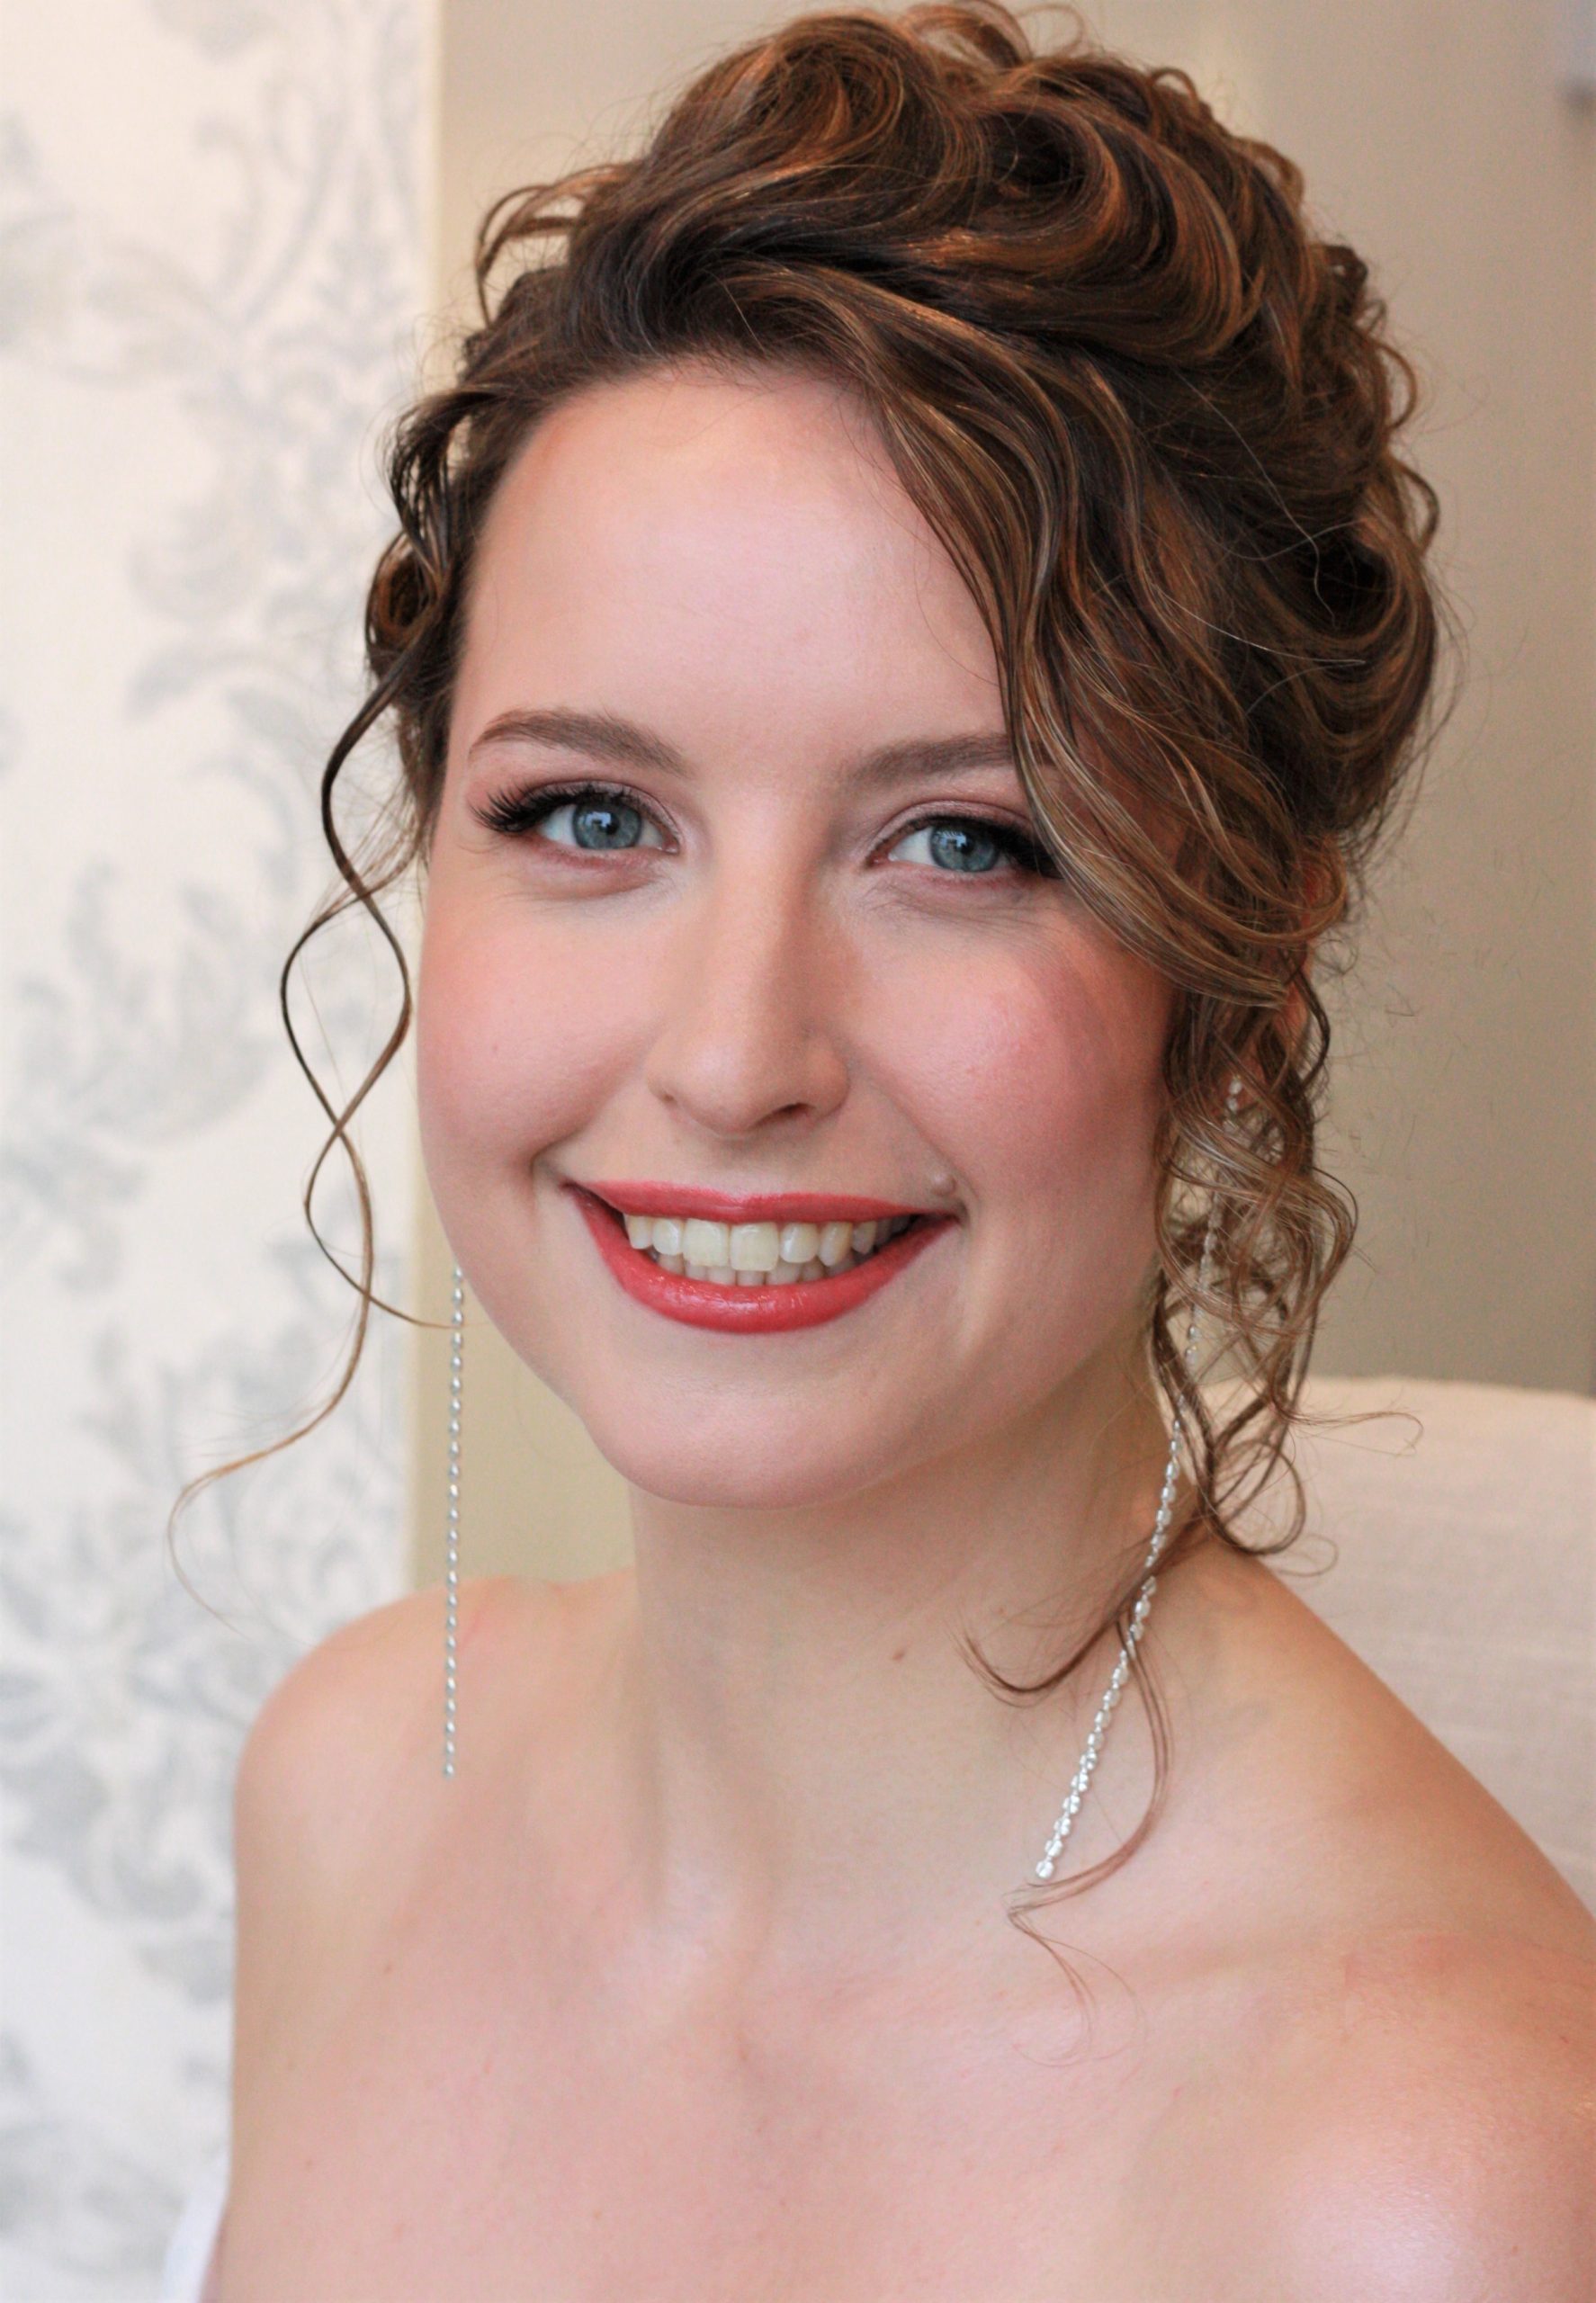 Bridal makeup and hairstyling with natural curls